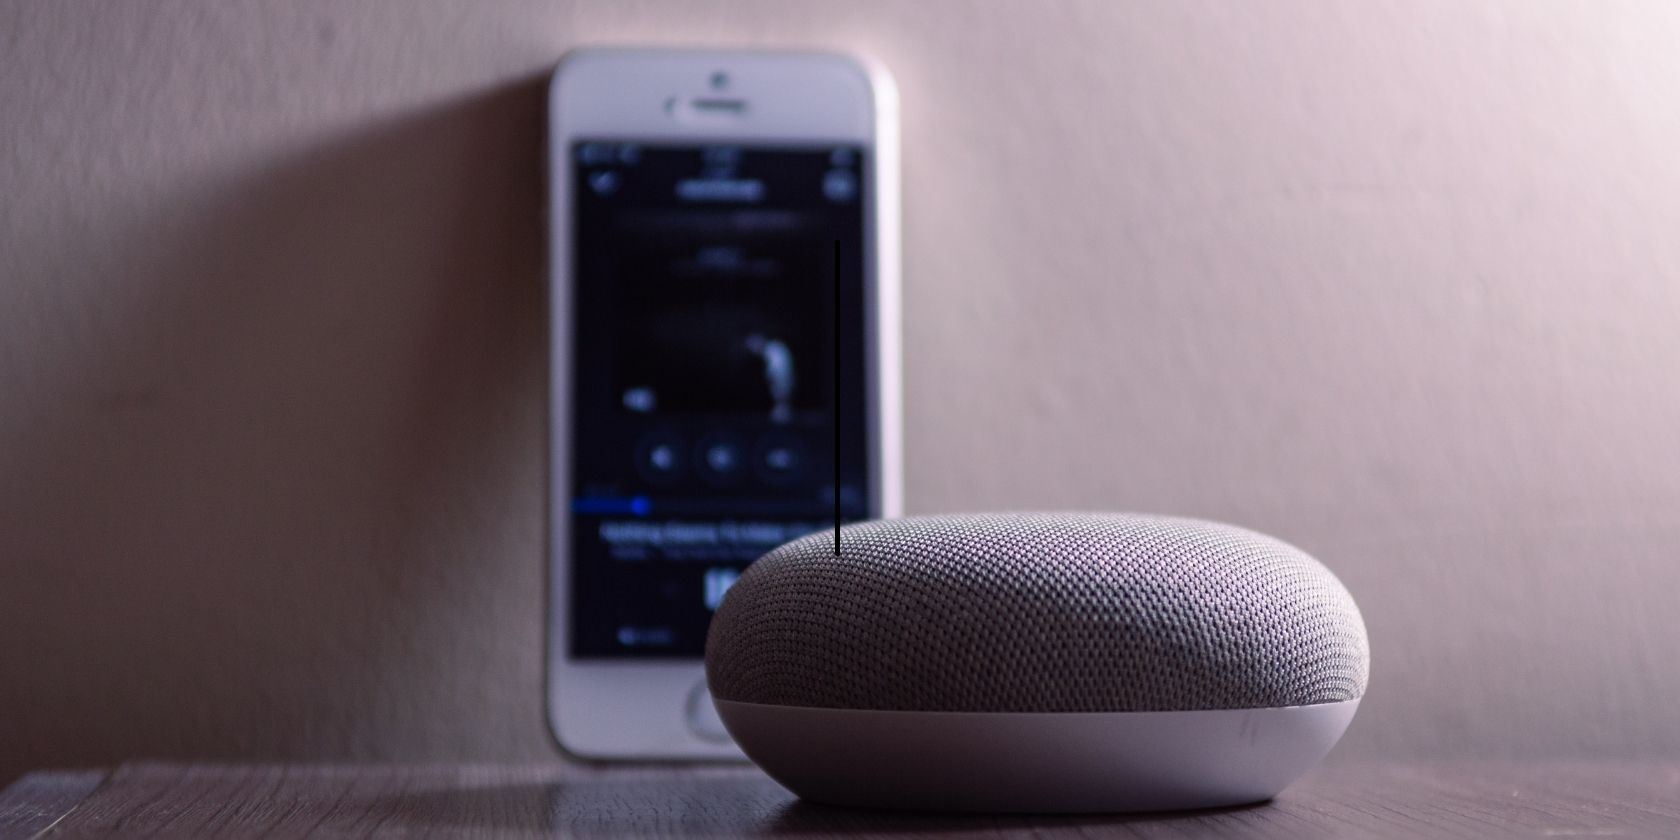 Google home device and iPhone